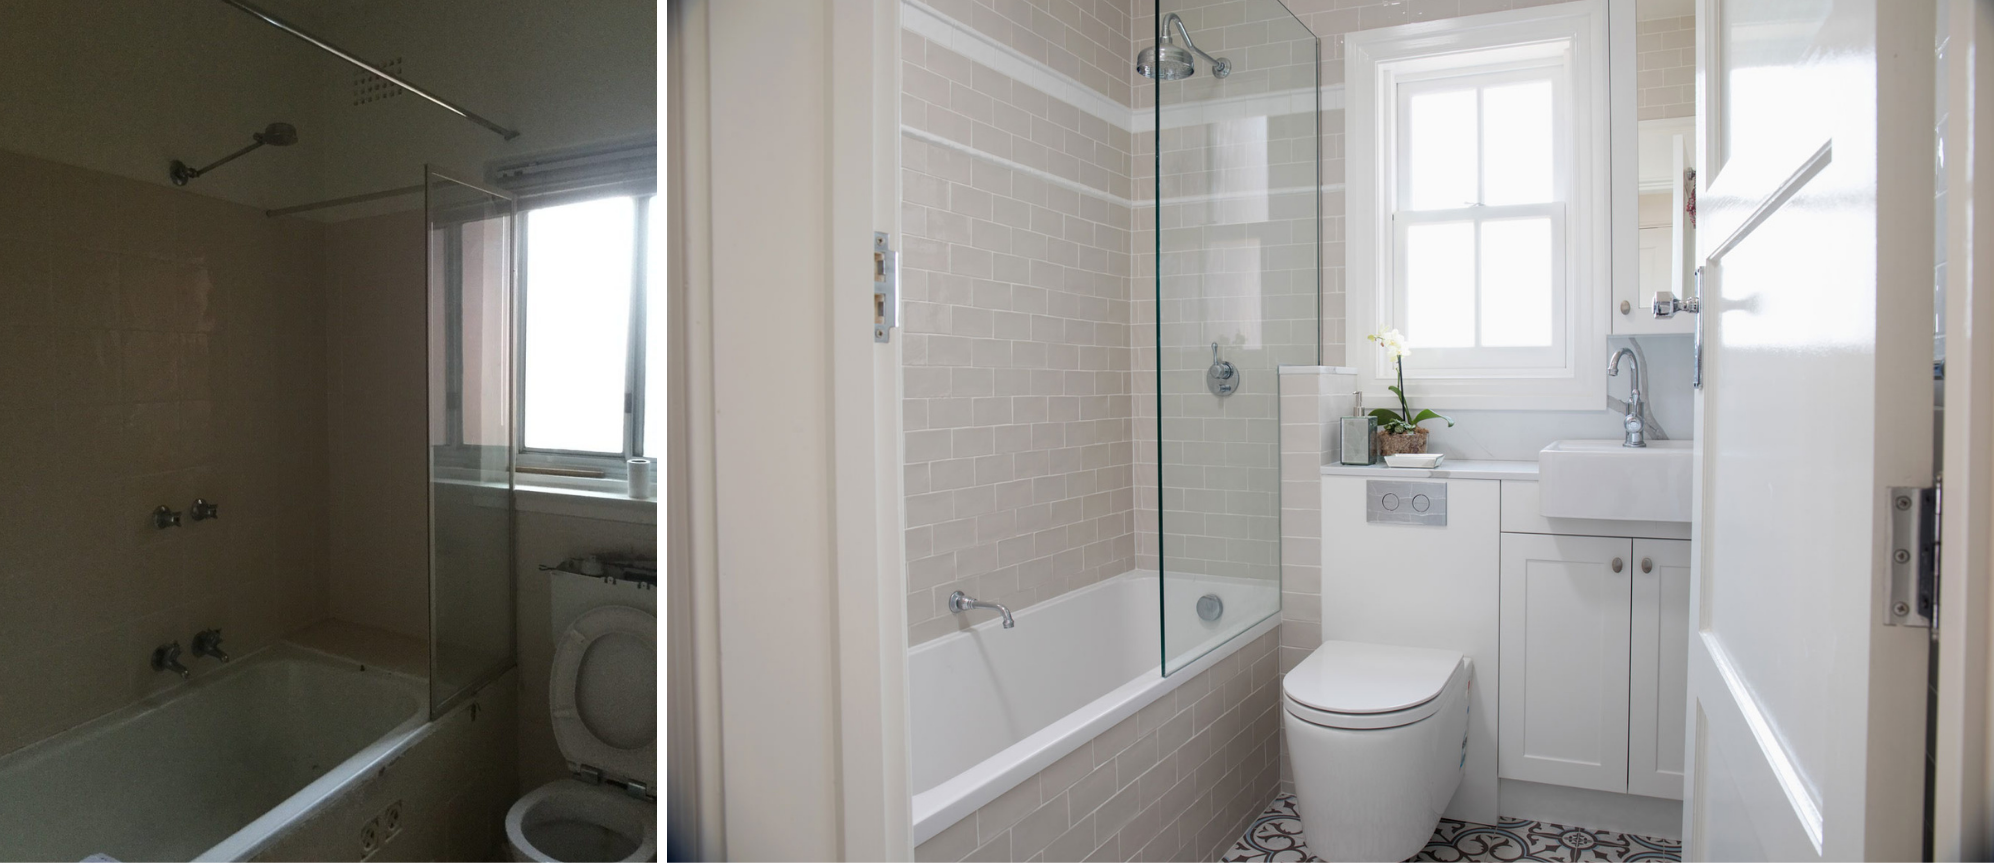 how much to renovate a bathroom before dark heritage home after ainslie classic fresh bathroom shower tub